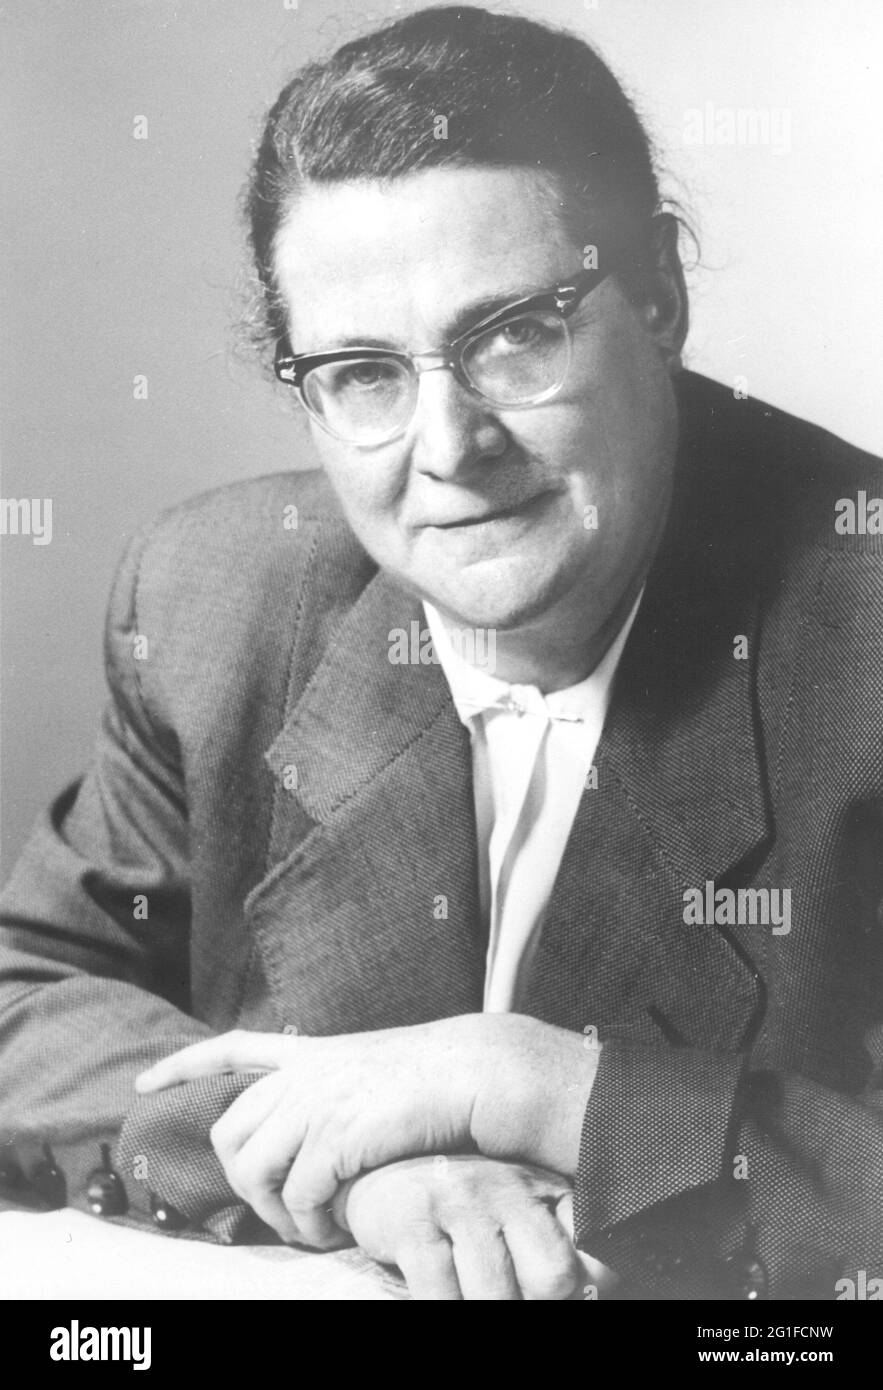 Wessel, Helene, 6.7.1898 - 13.10.1969, German politician (SPD), ADDITIONAL-RIGHTS-CLEARANCE-INFO-NOT-AVAILABLE Stock Photo